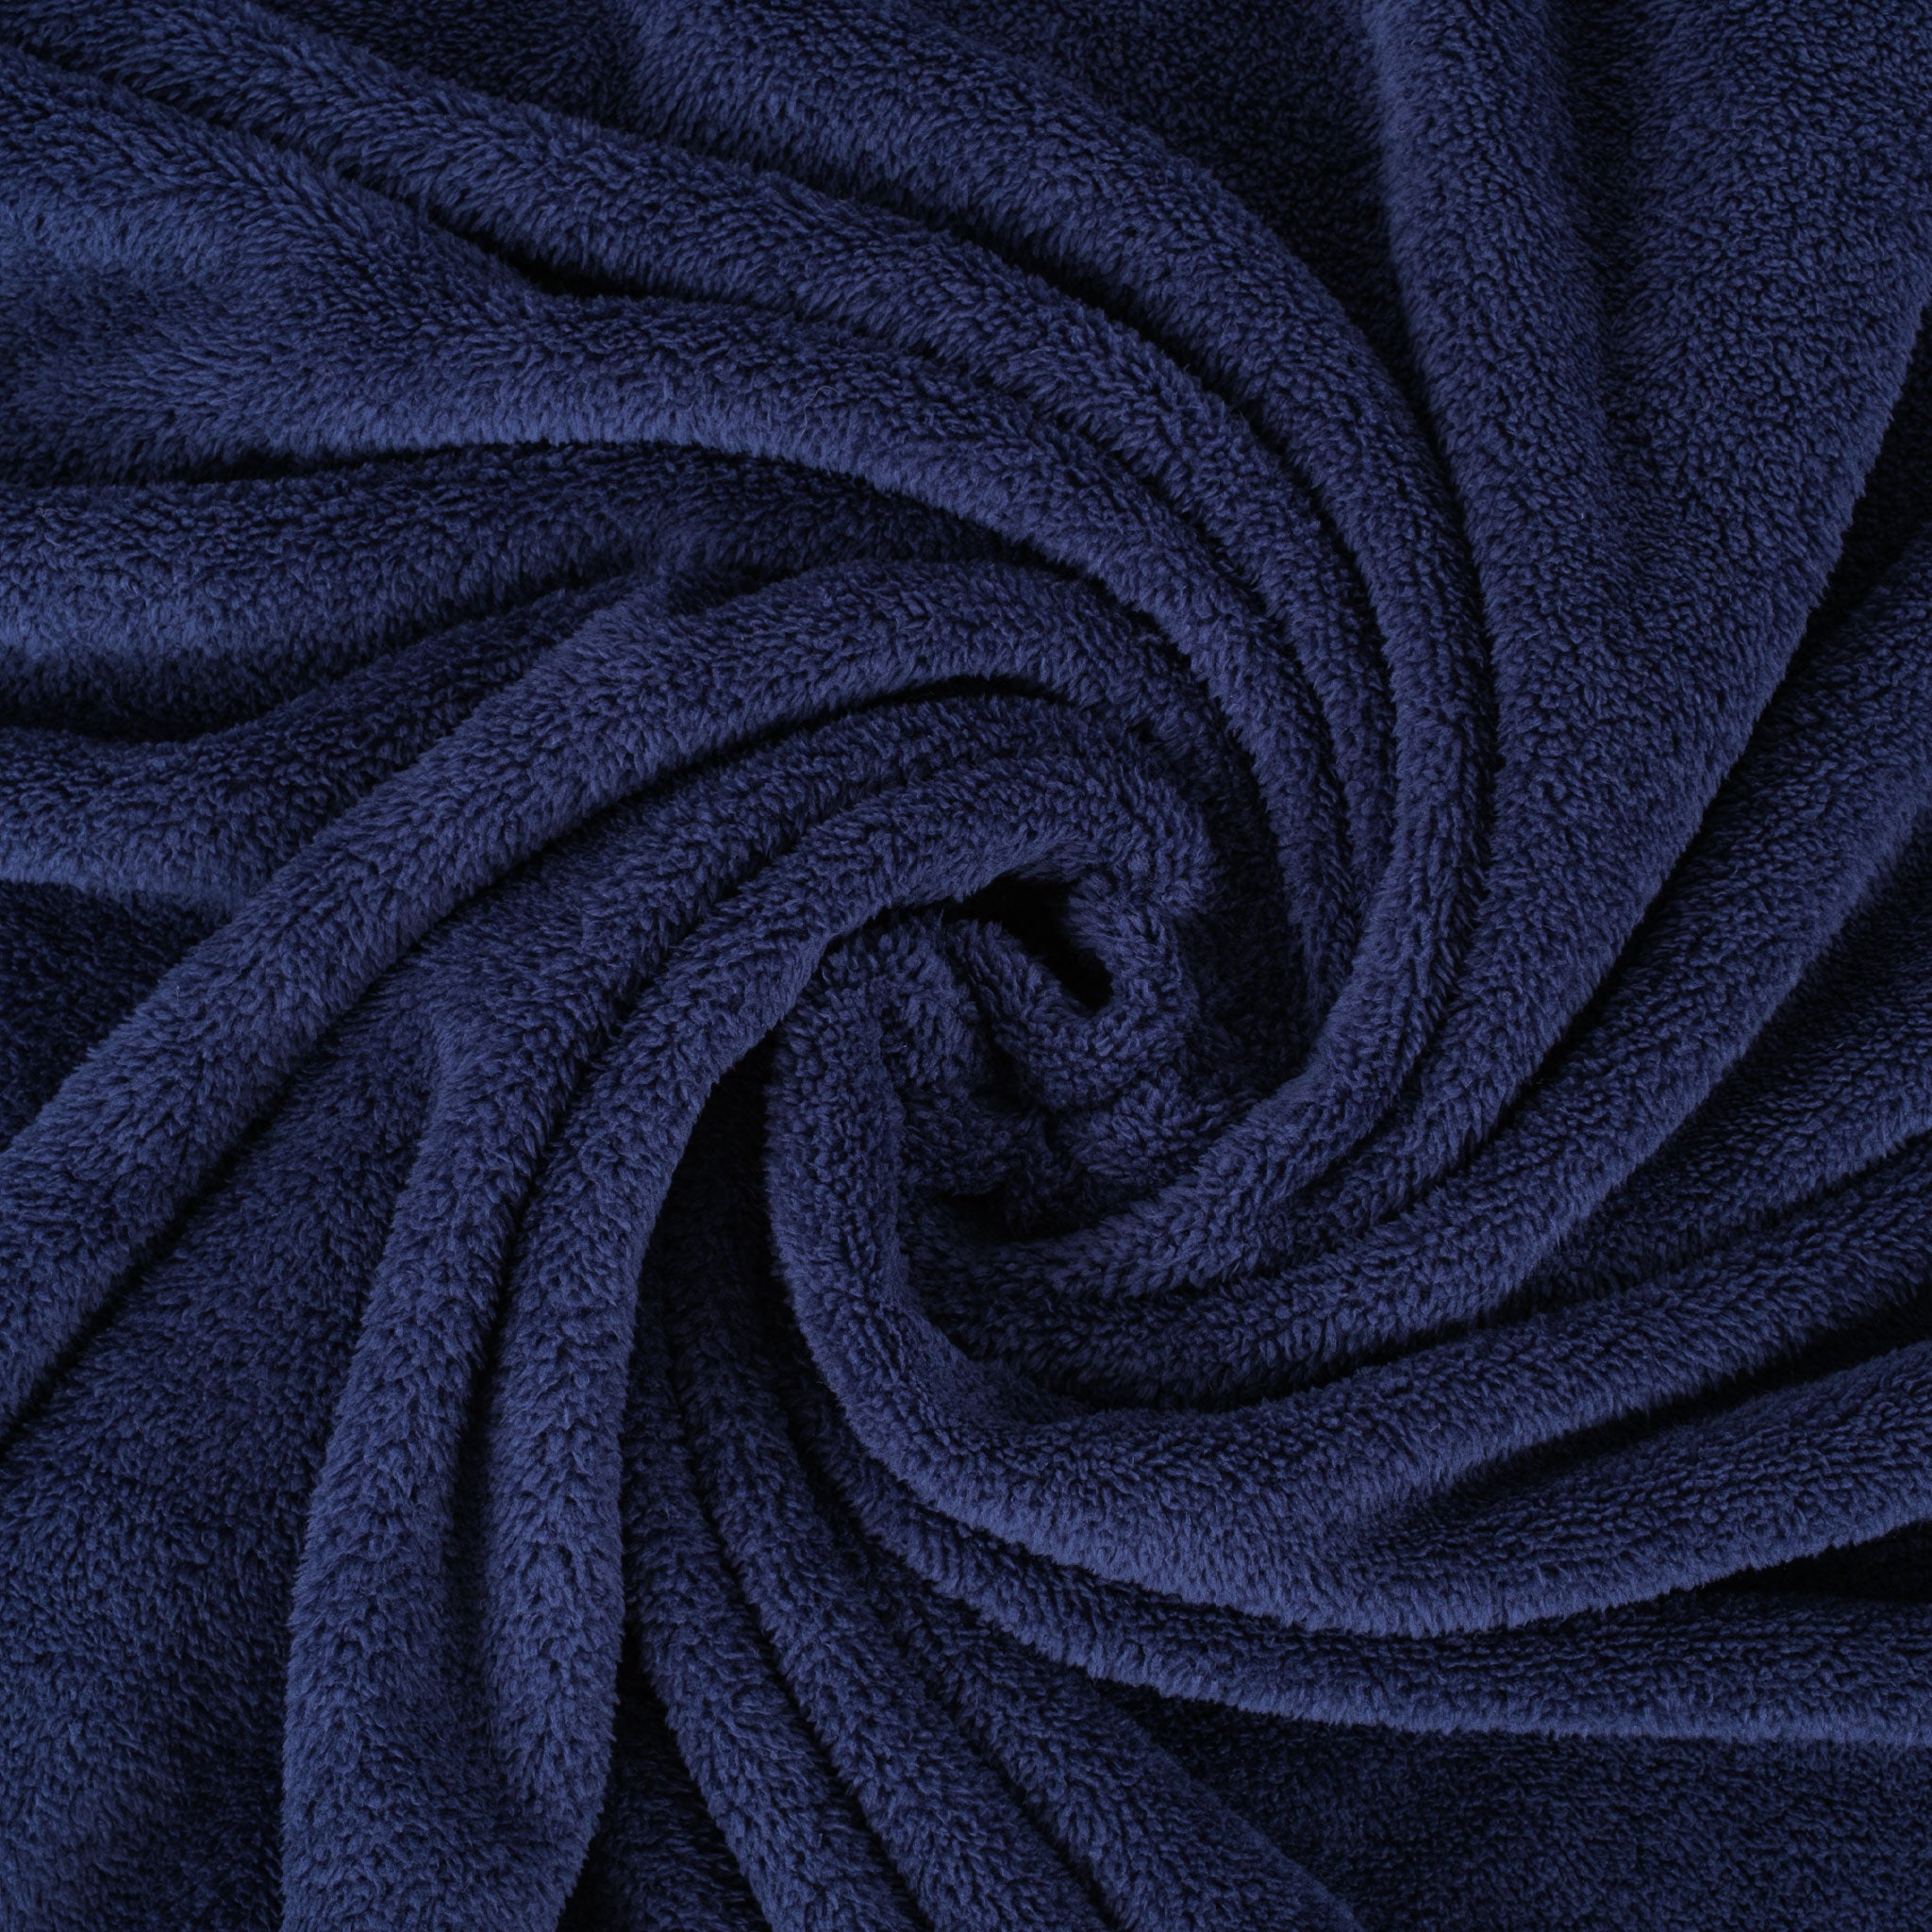 American Soft Linen - Bedding Fleece Blanket - Wholesale - 24 Set Case Pack - Throw Size 50x60 inches - Navy-Blue - 5